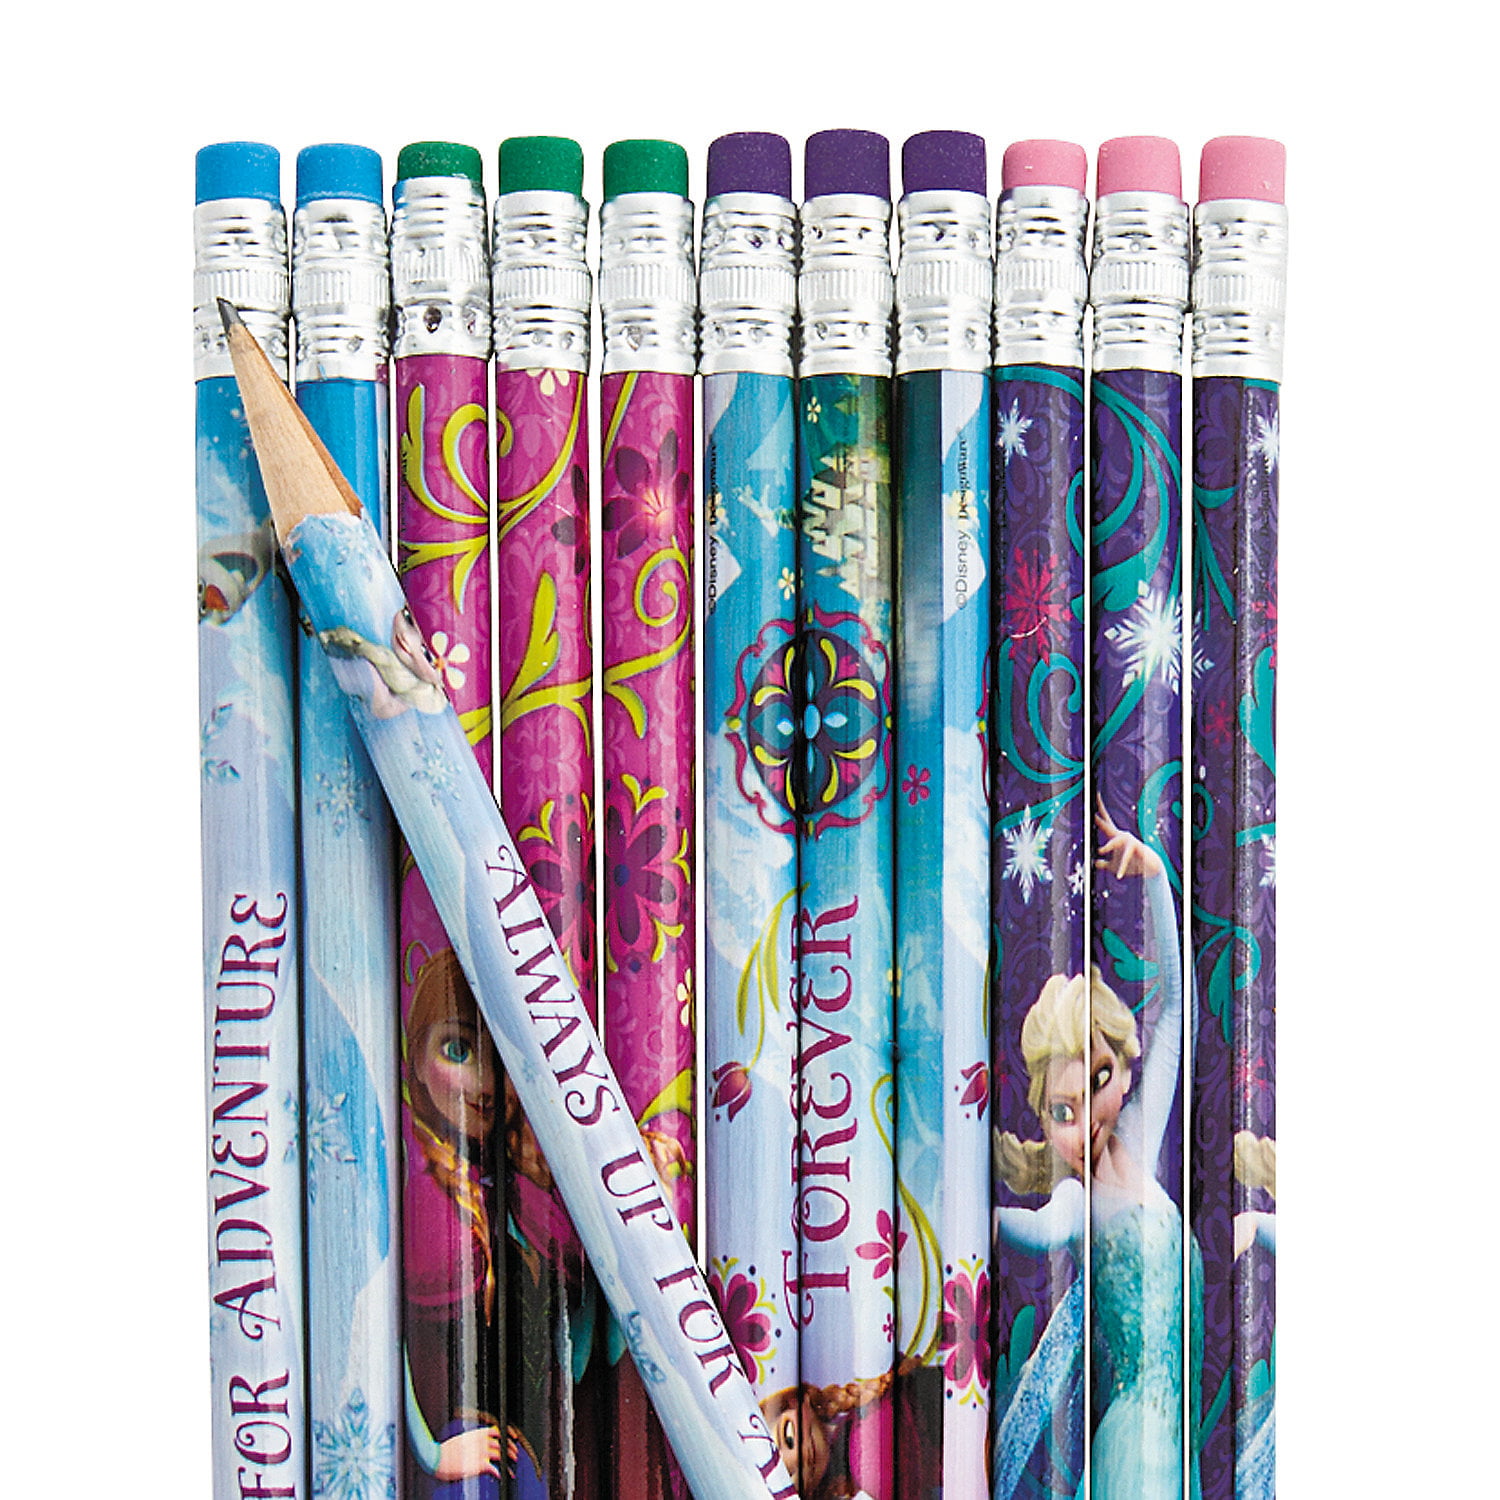 Kids LED Pencils & Color Gift Set Writing School Supplies Party Fun Favors  Toys